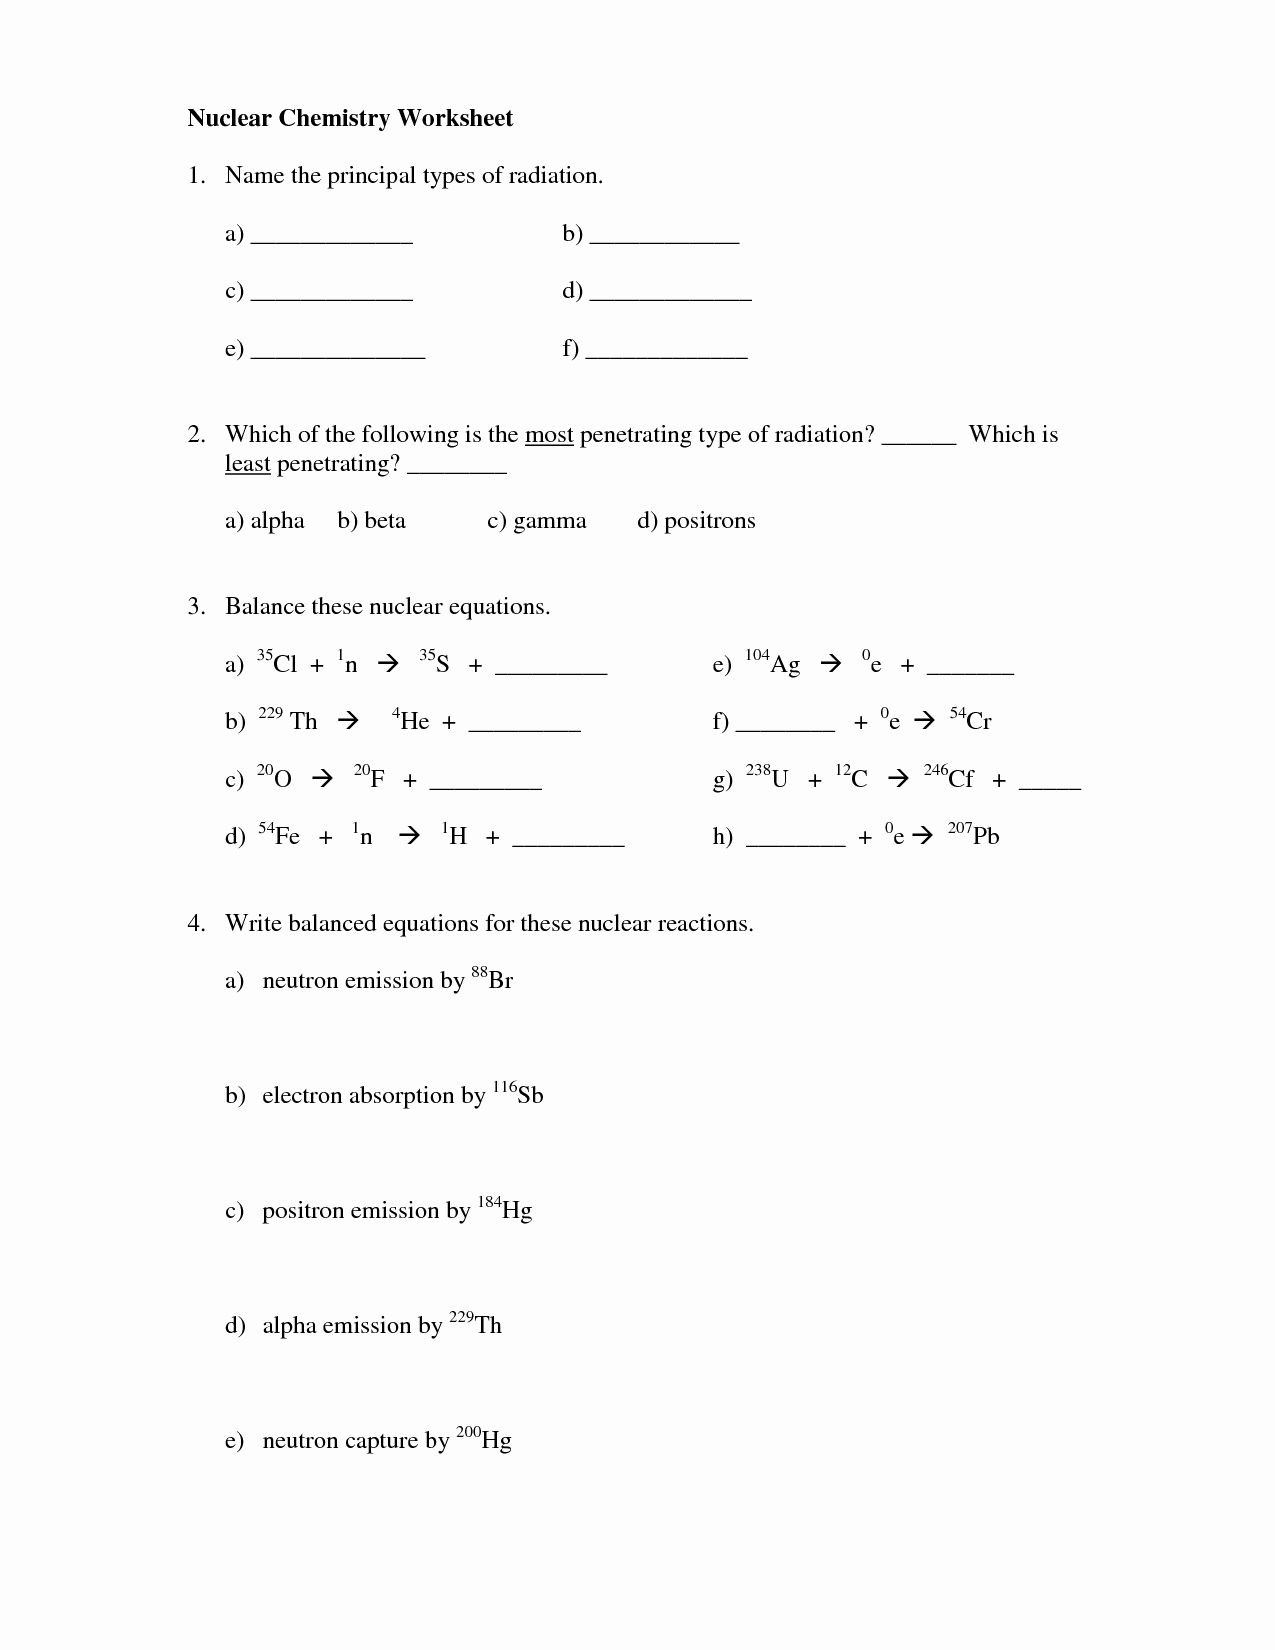 Nuclear Reactions Worksheet Answers Pin On Customize Design Worksheet Line